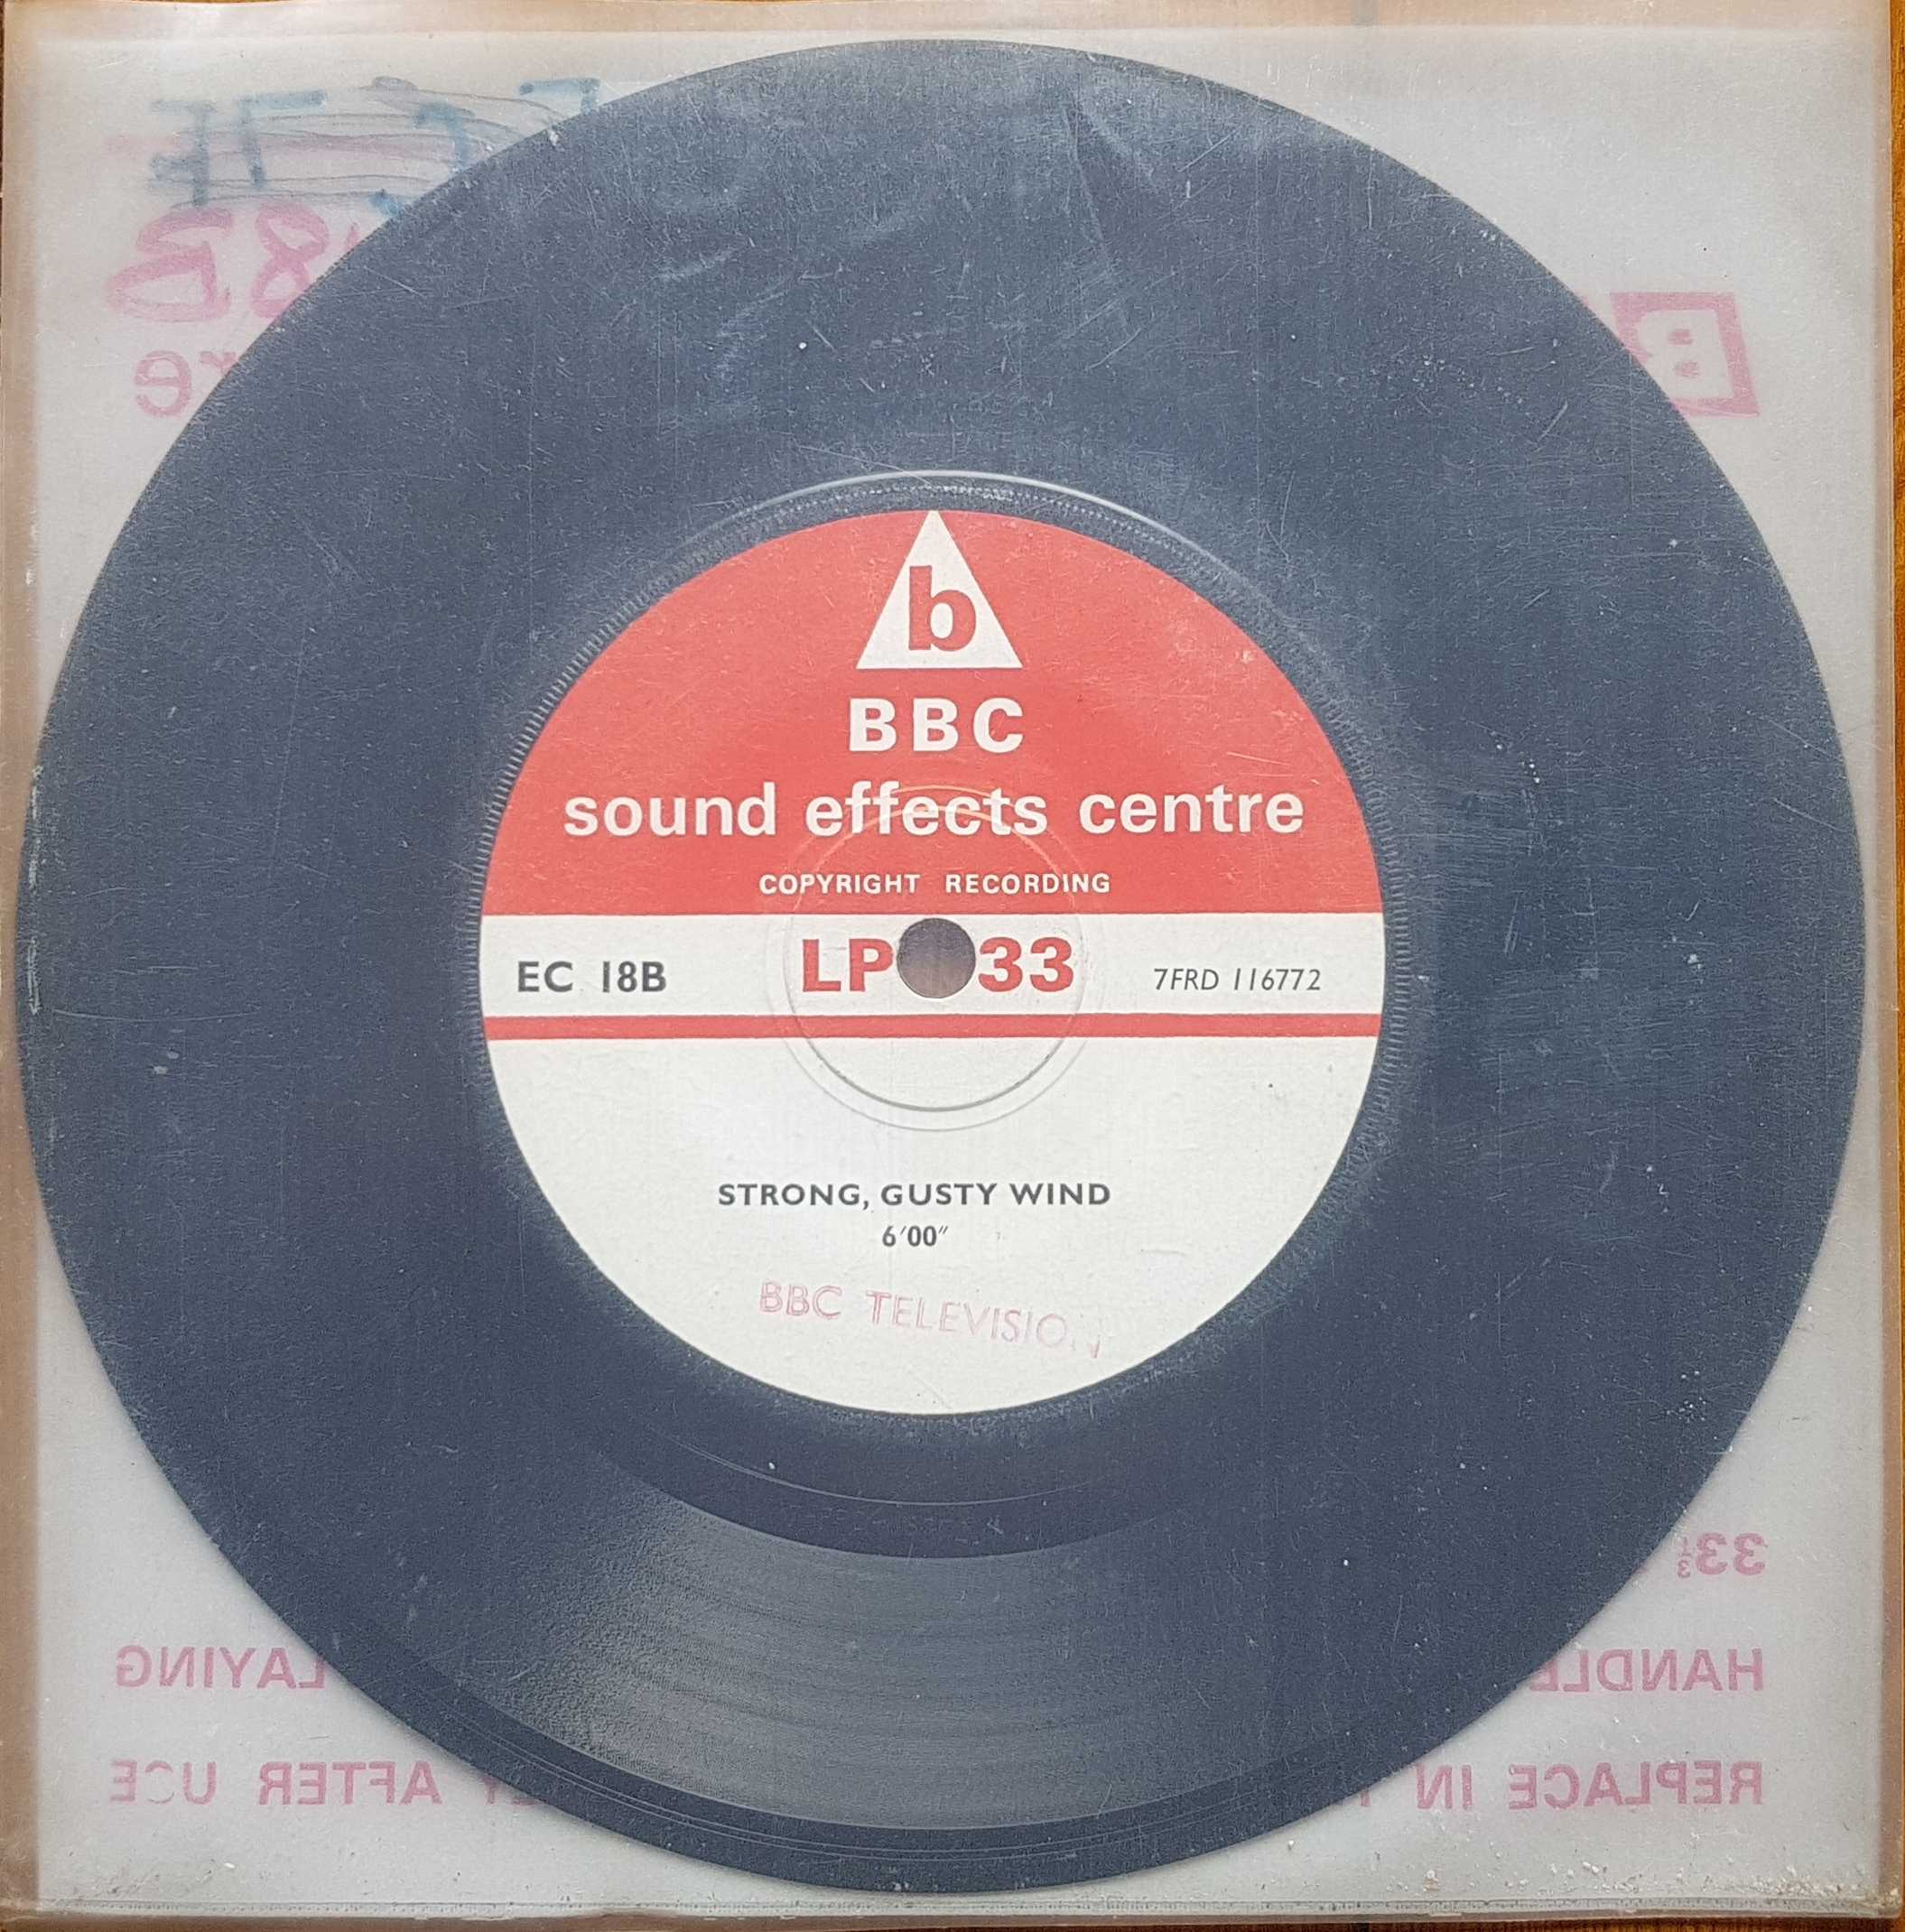 Picture of EC 18B Blizzard / Strong, gusty wind by artist Not registered from the BBC records and Tapes library